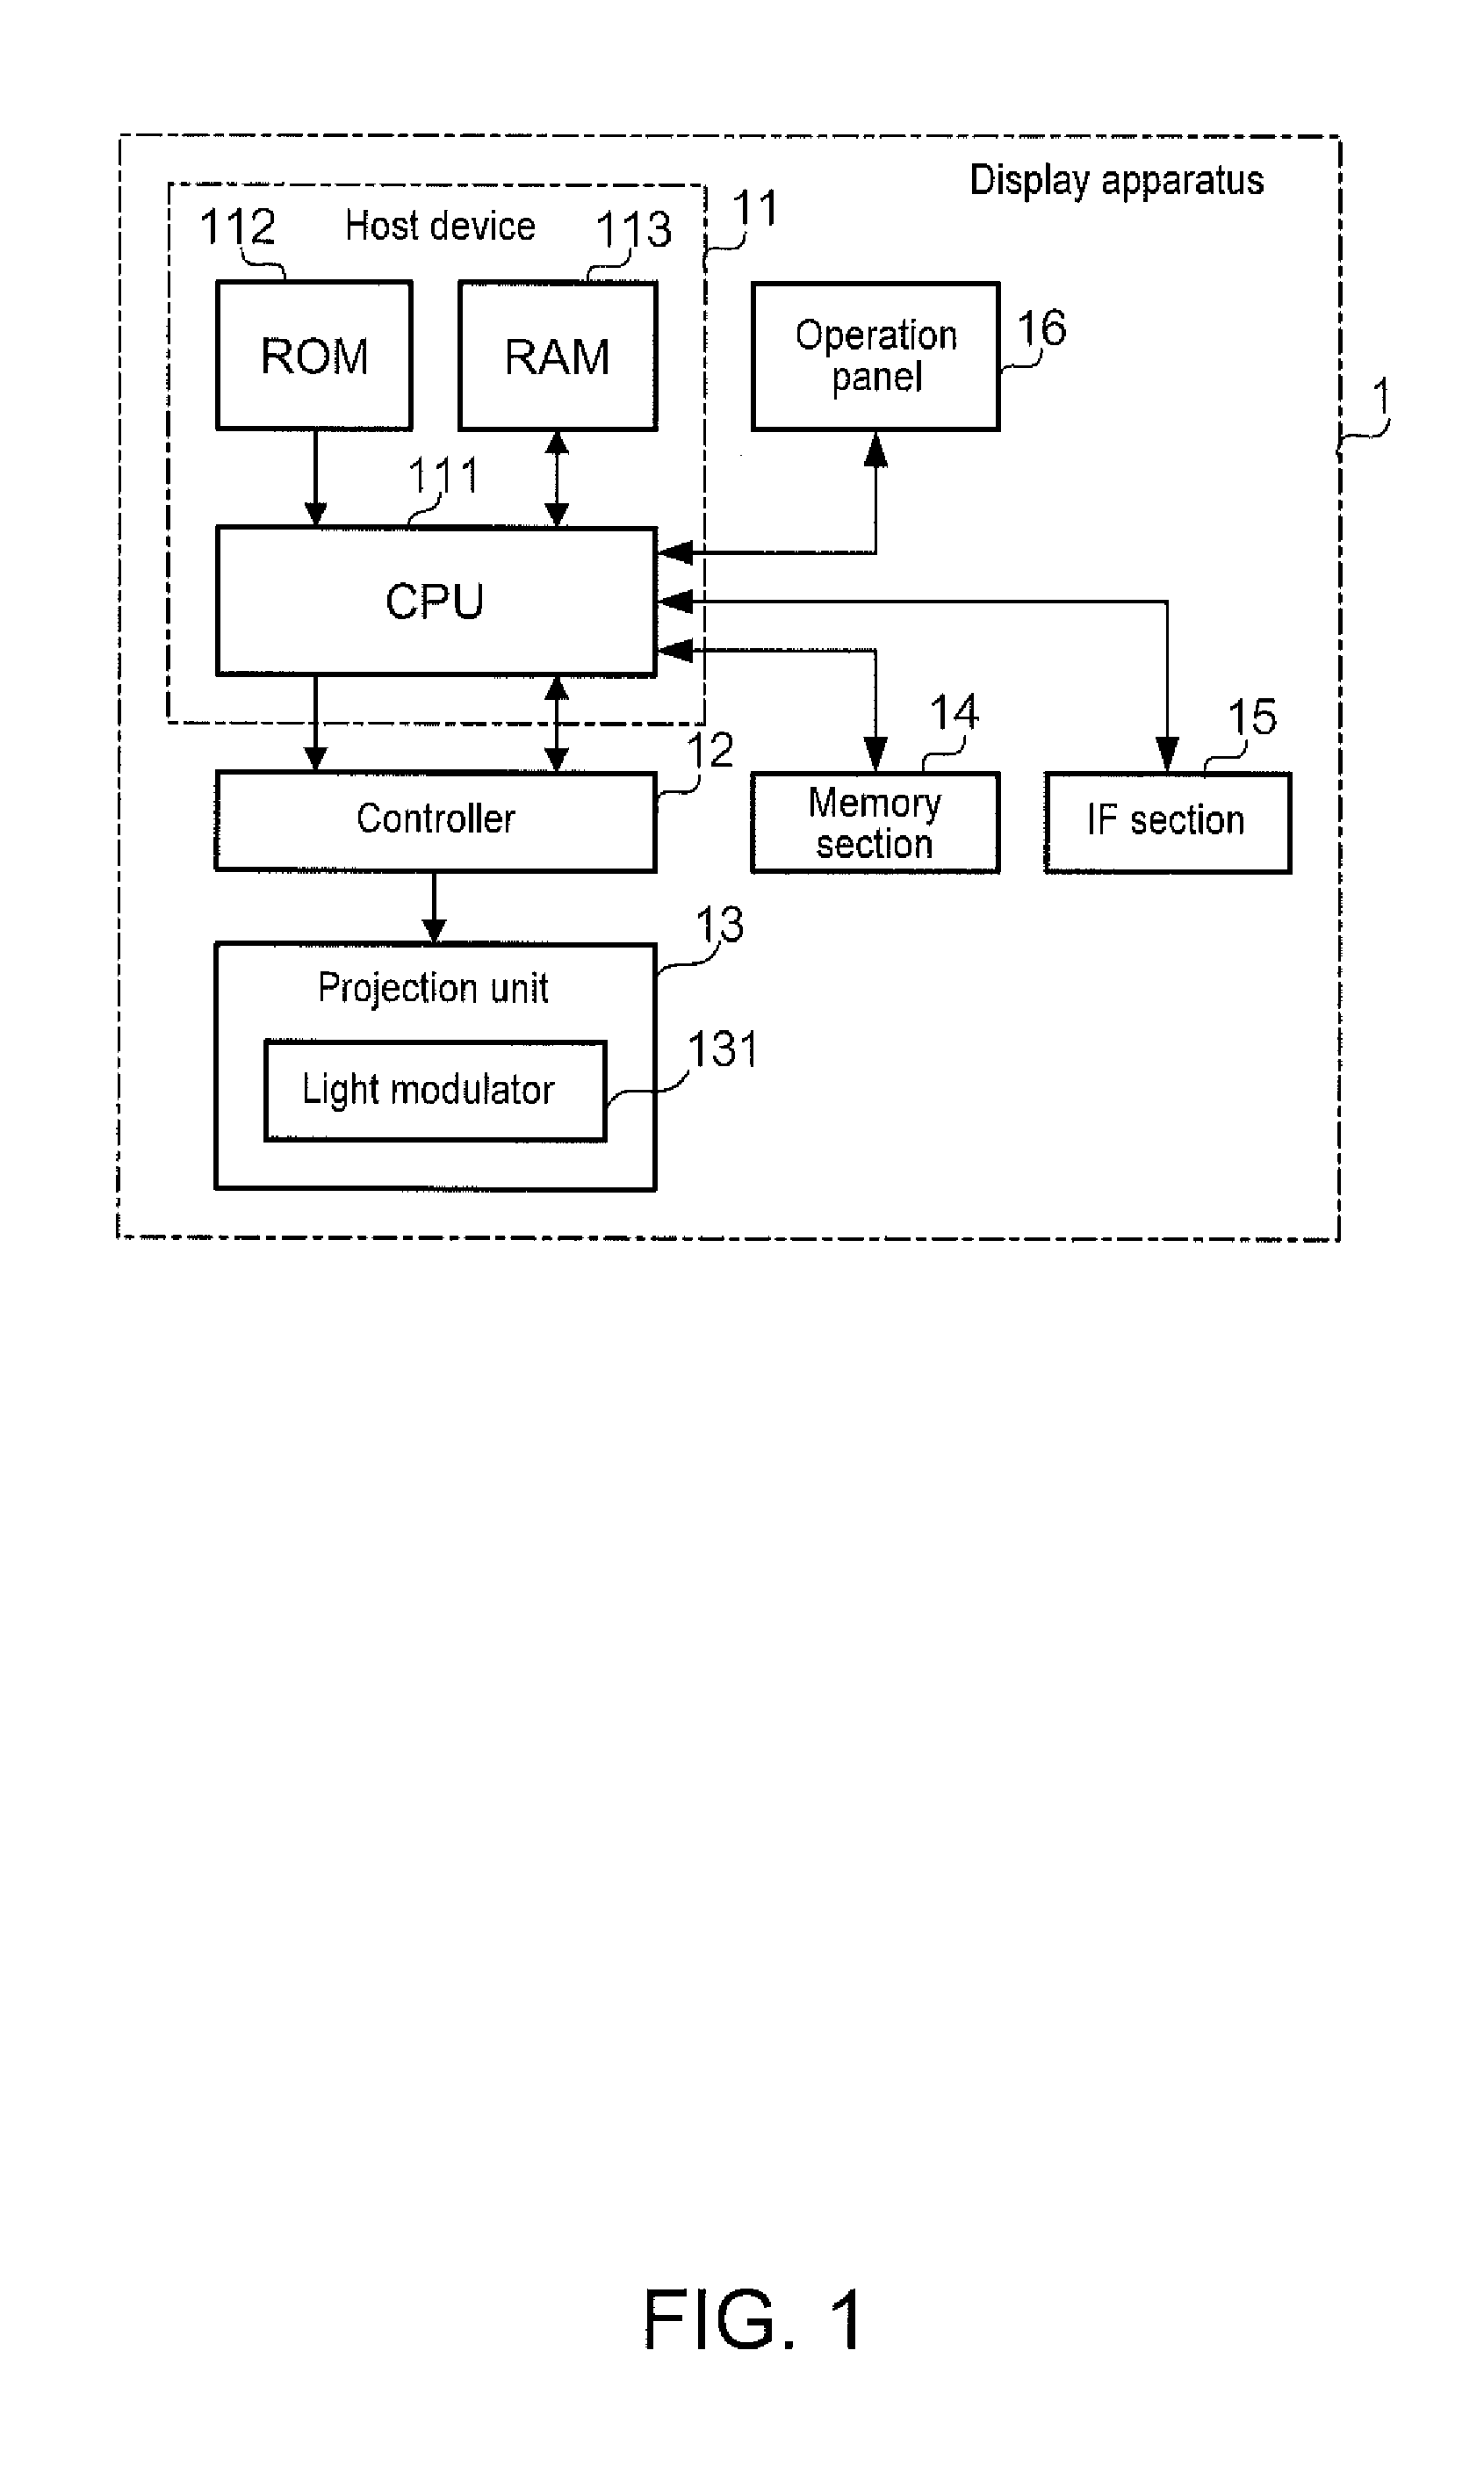 Image processing device, display apparatus, and image processing method